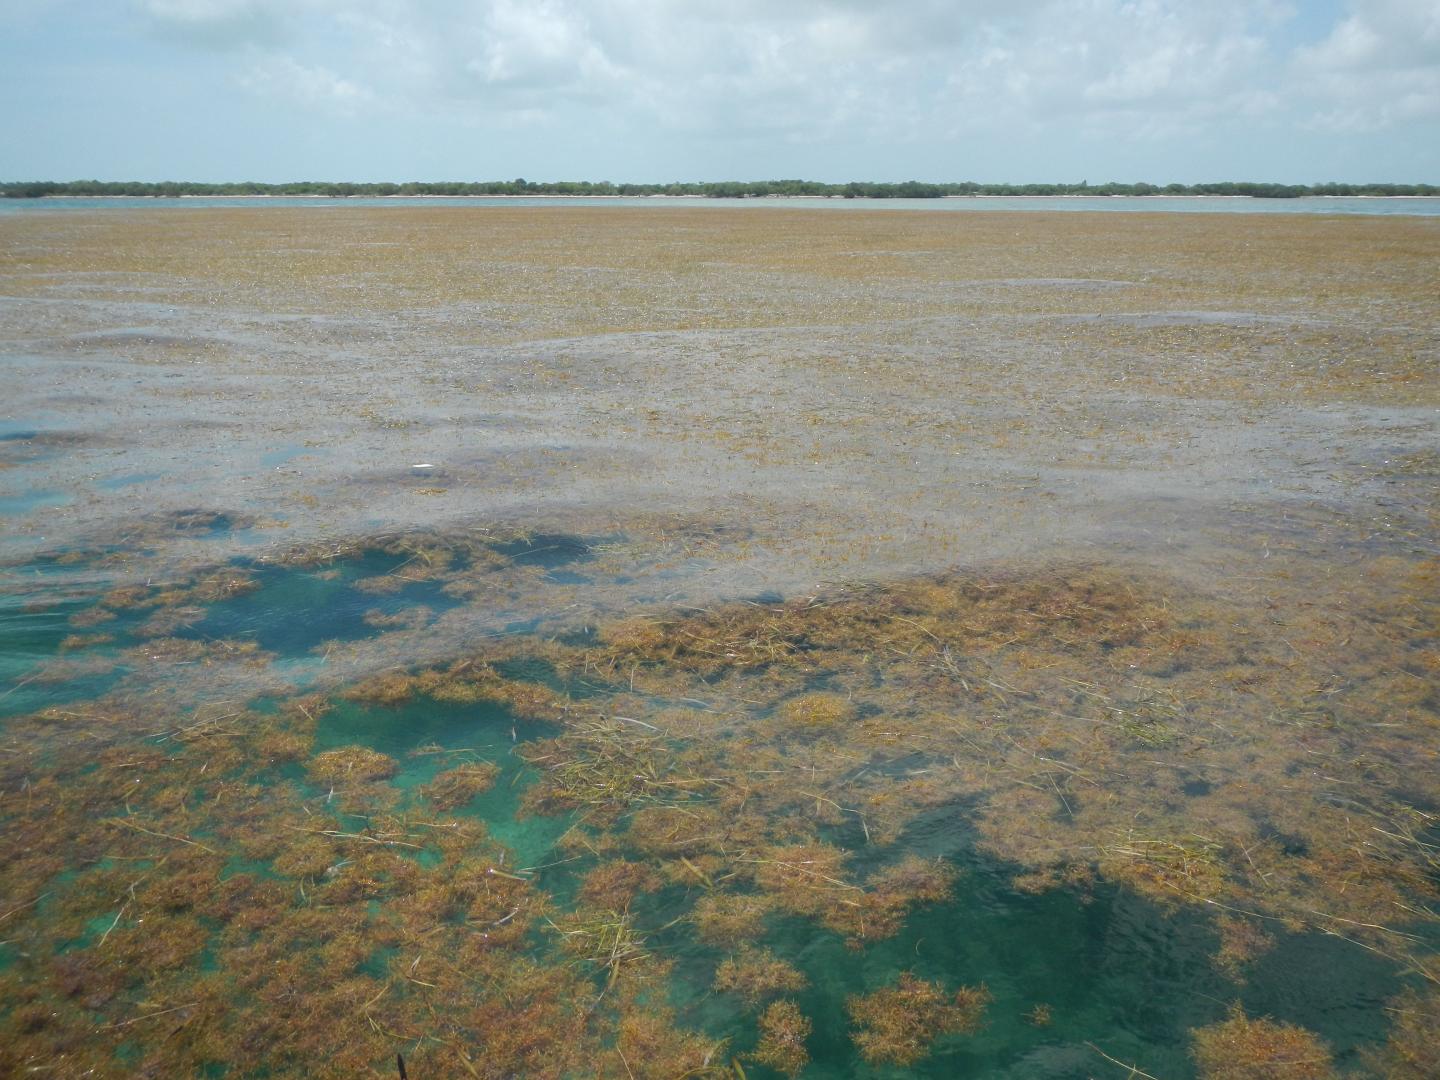 The largest bloom of macroalgae in the world stretches from West Africa to the Gulf of Mexico